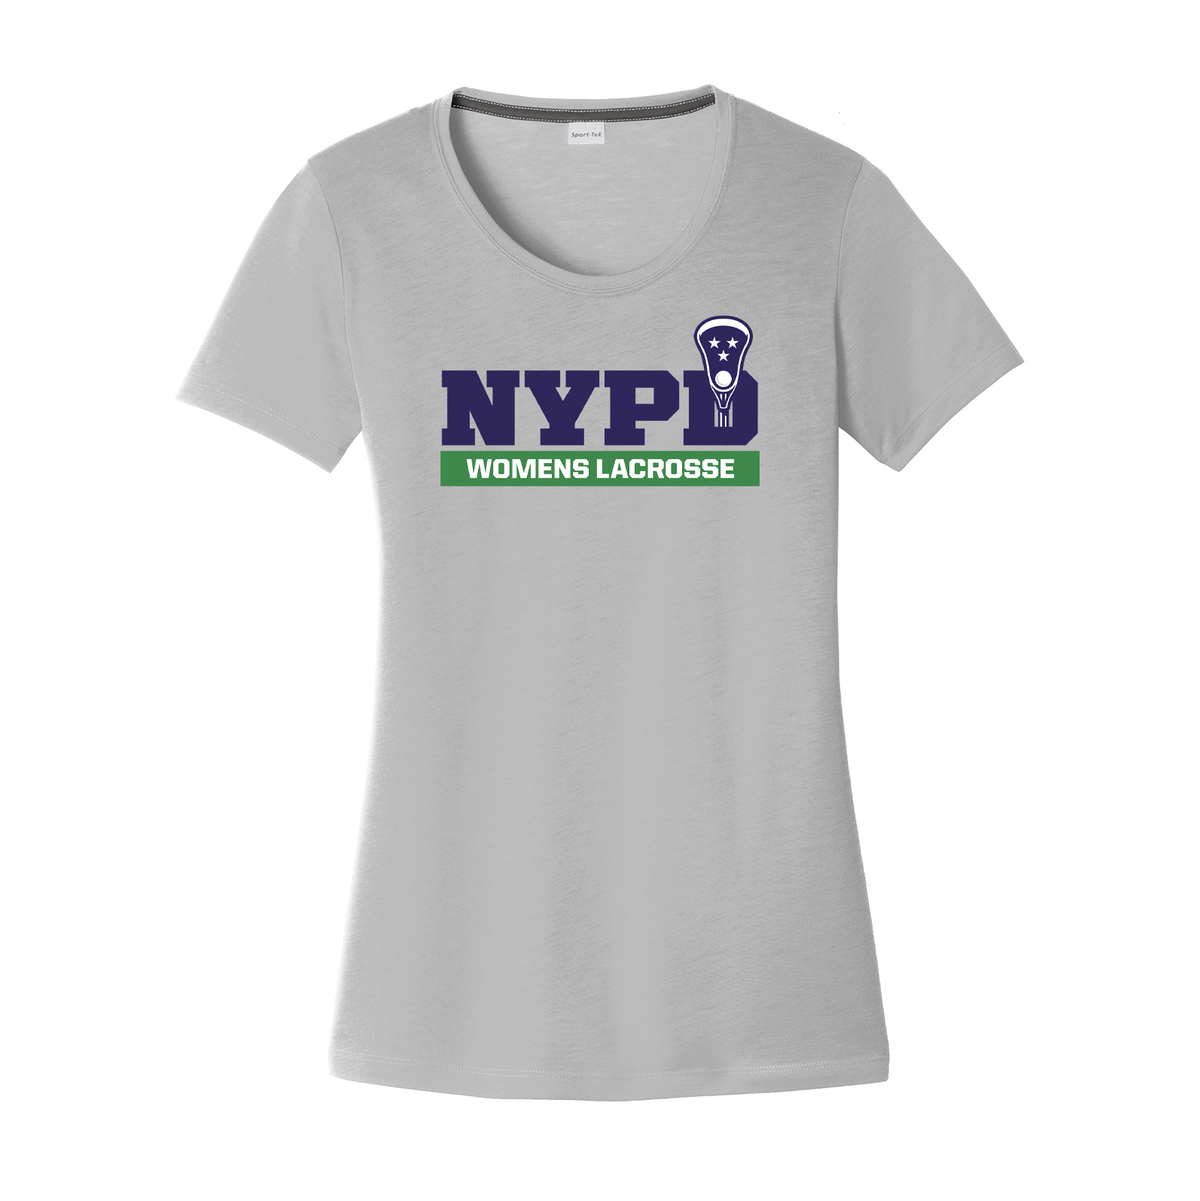 NYPD Womens Lacrosse Women's CottonTouch Performance T-Shirt